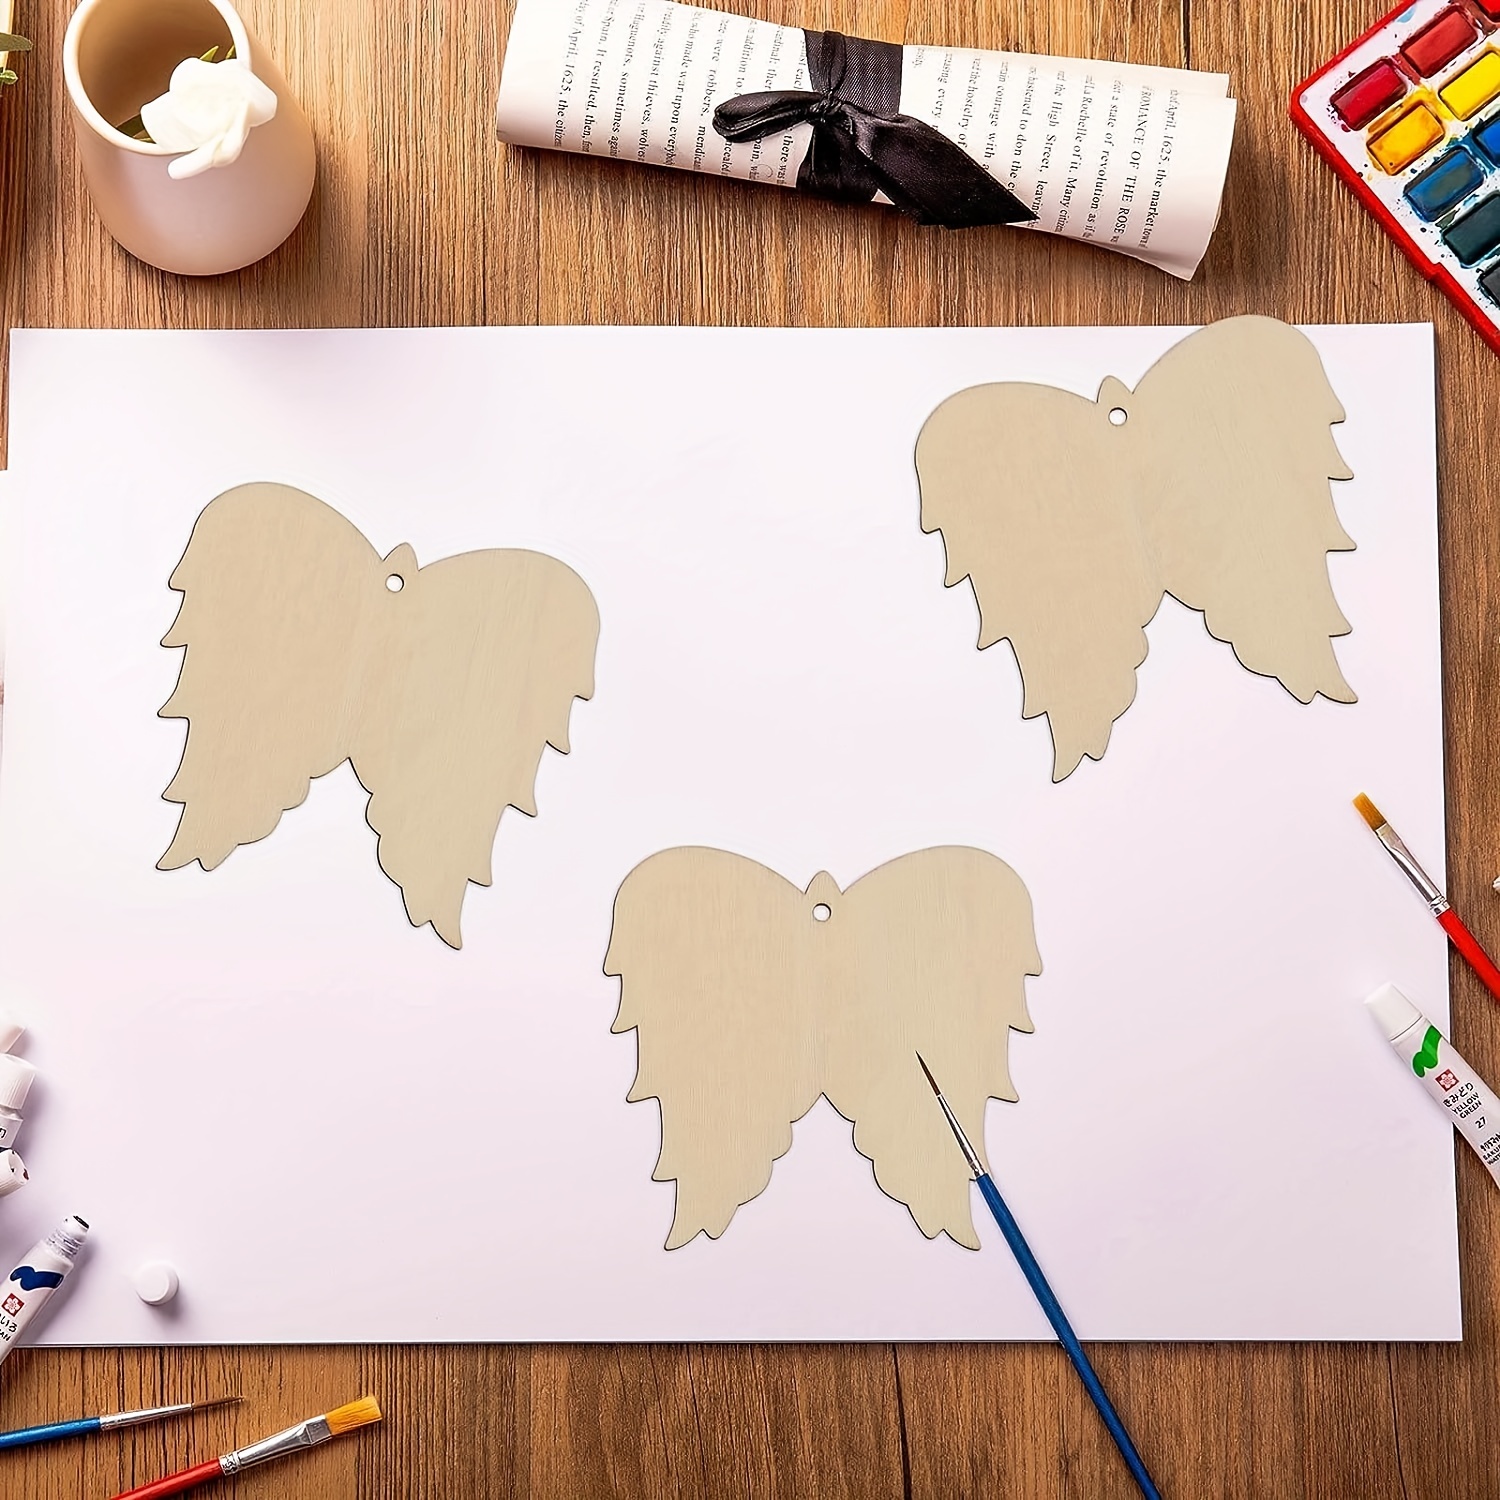 Wood Angel Wings Decorative Embellishments for Crafts